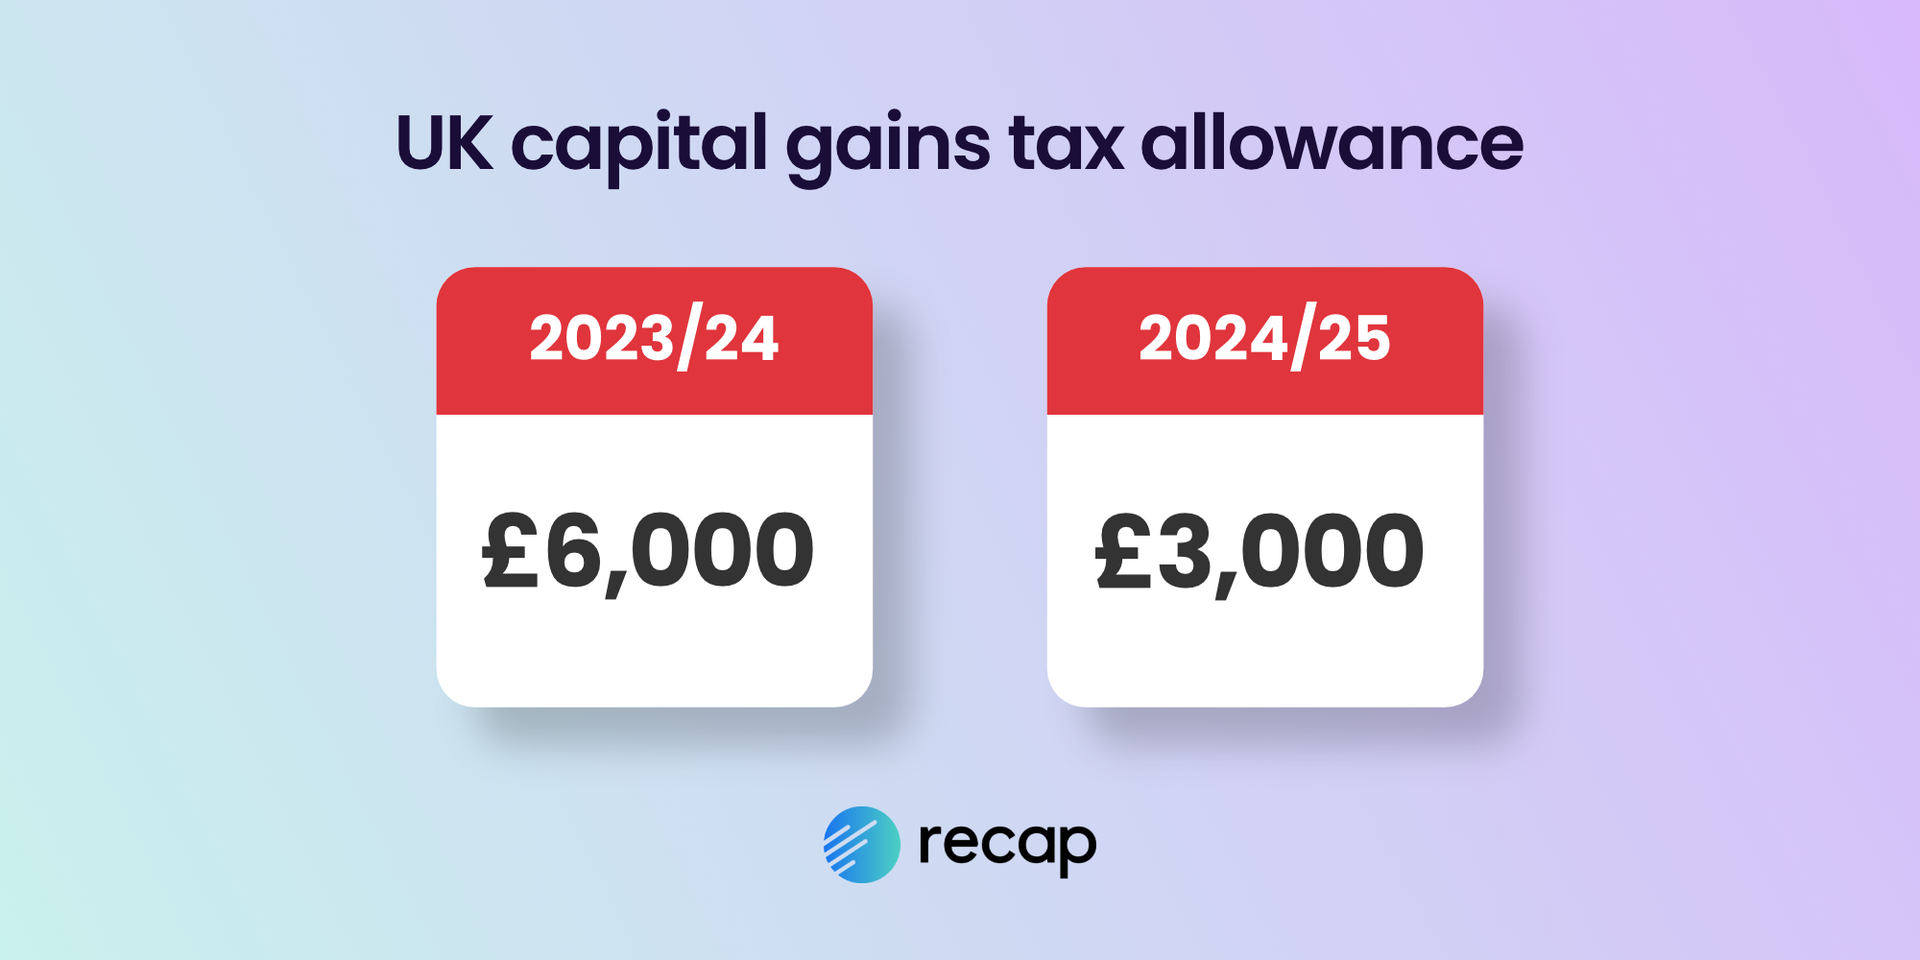 An infographic showing the UK capital gains allowance is £6,000 for the 2023/24 tax year and £3,000 for 2024/25